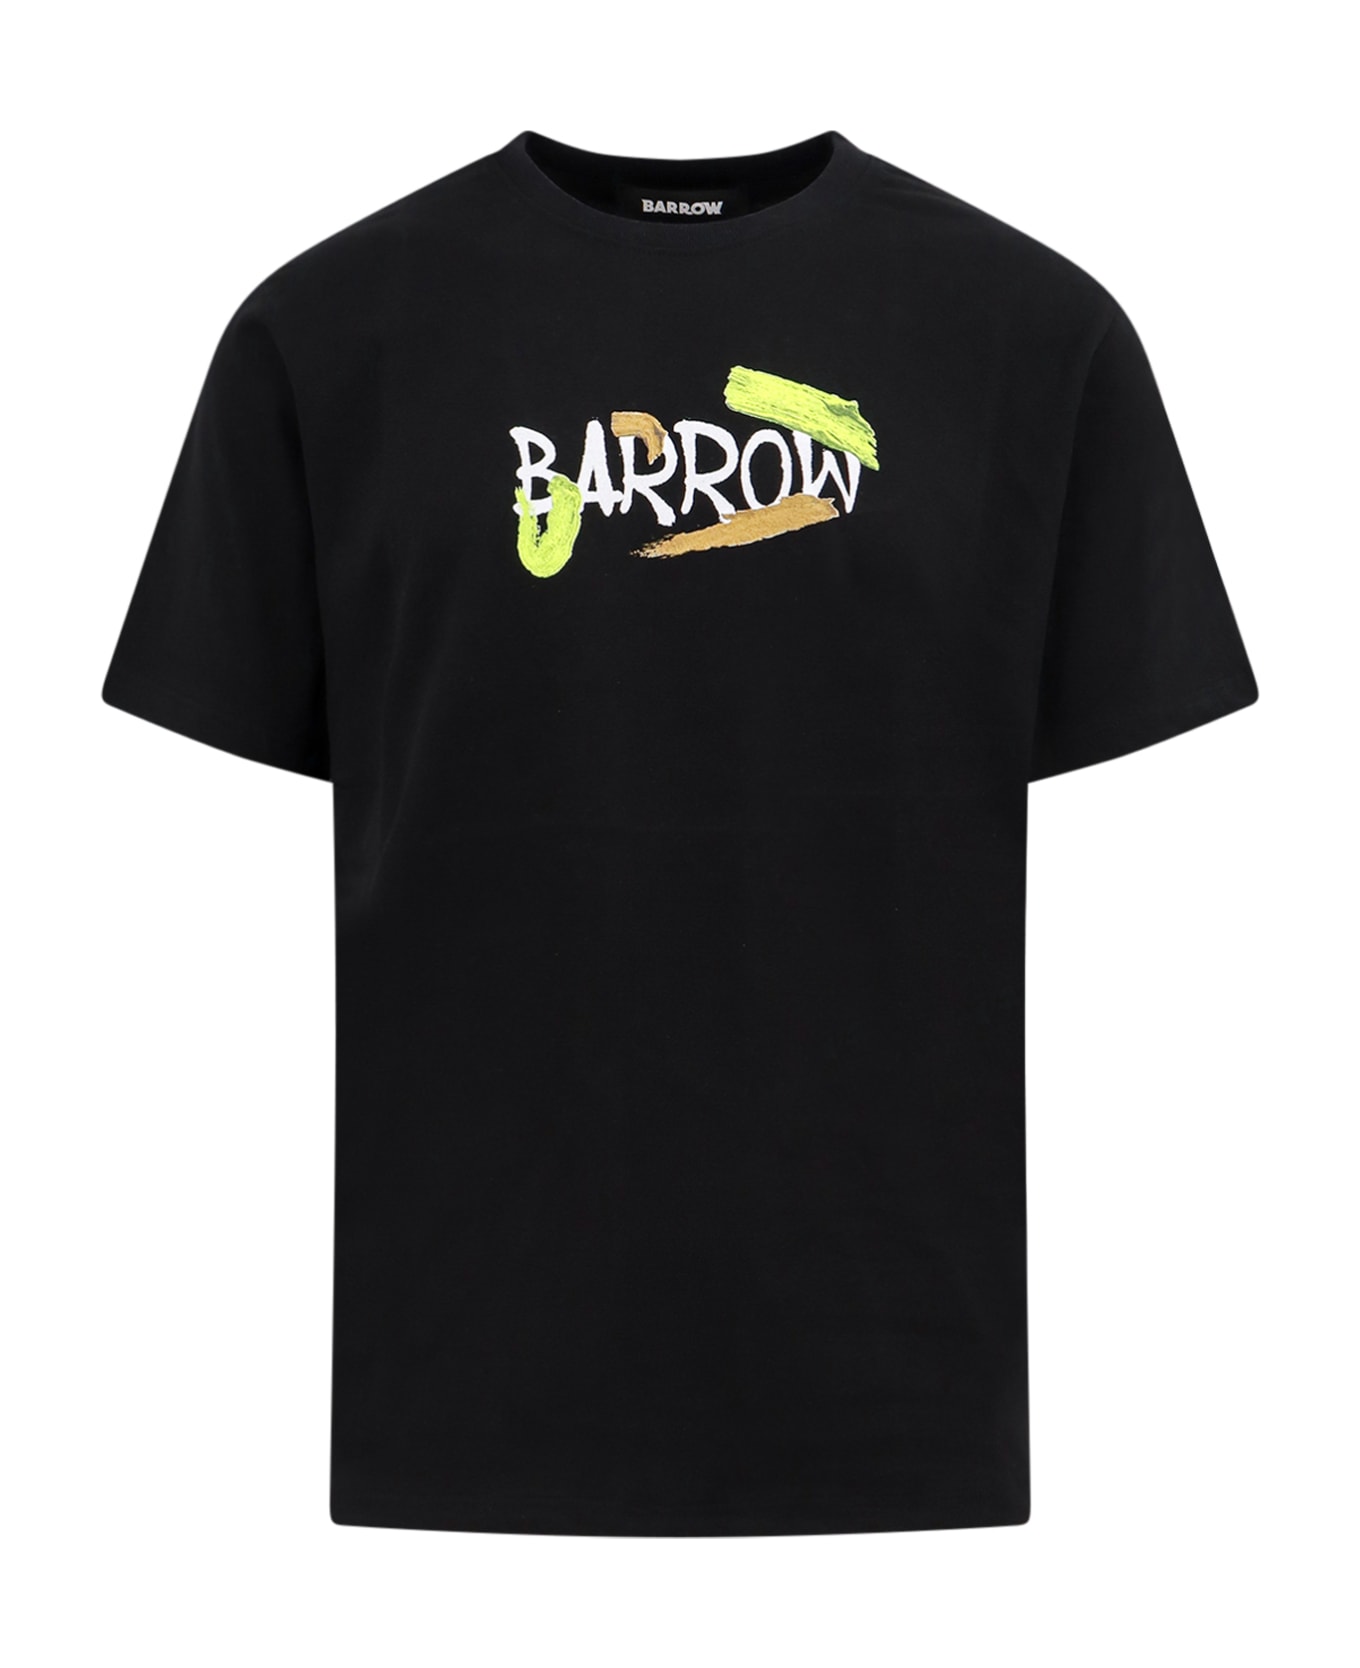 Barrow Black T-shirt With Lettering And Graphic Print - Black Tシャツ